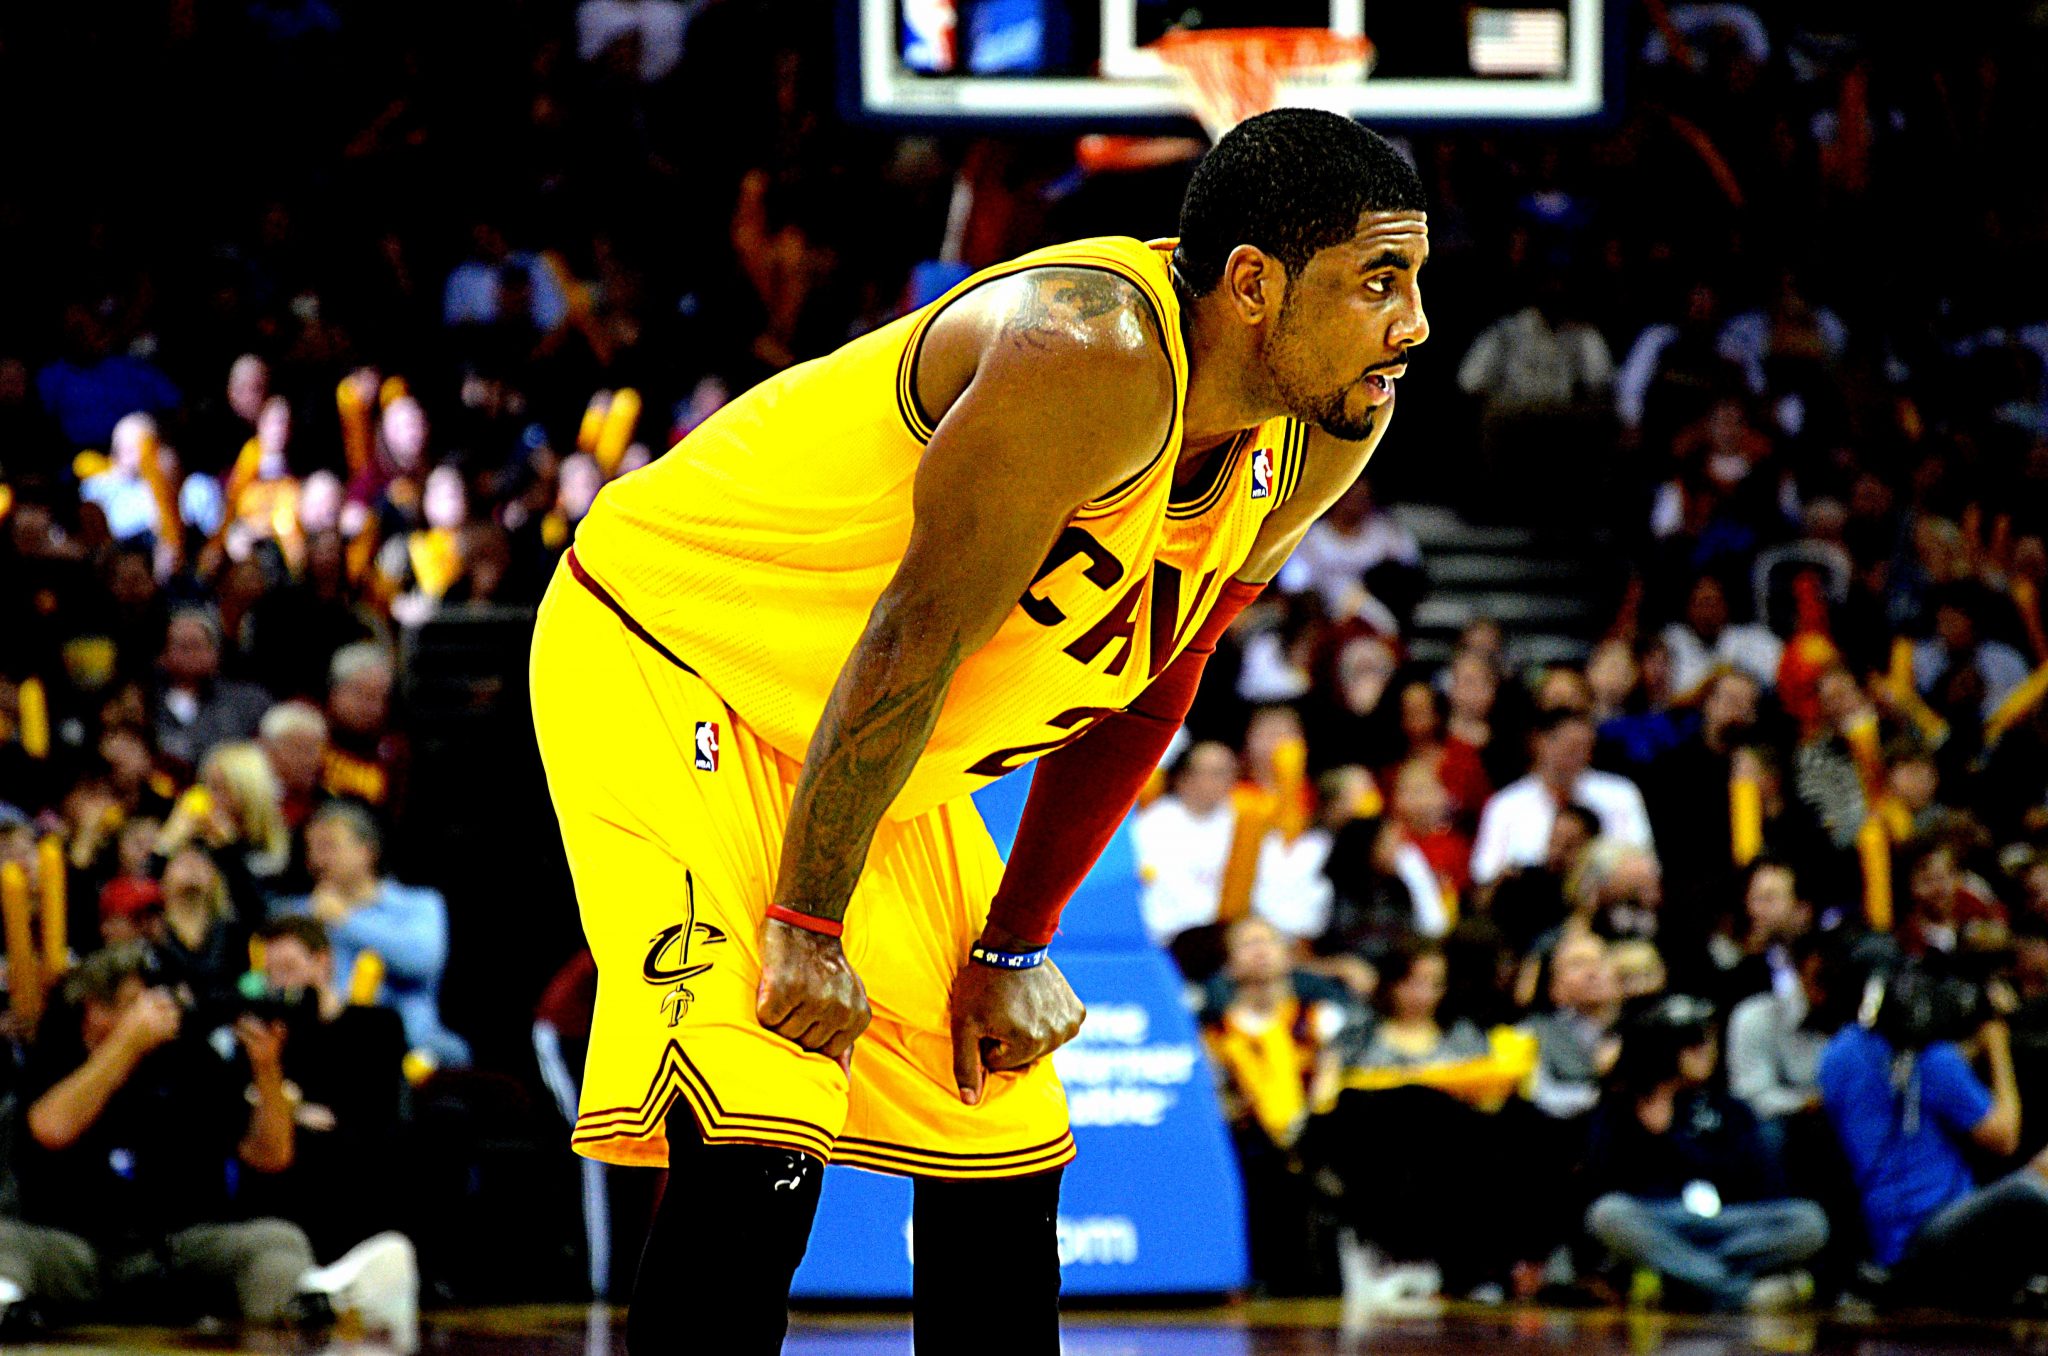 Kyrie Irving Cleveland Cavaliers - Basketball Player - HD Wallpaper 